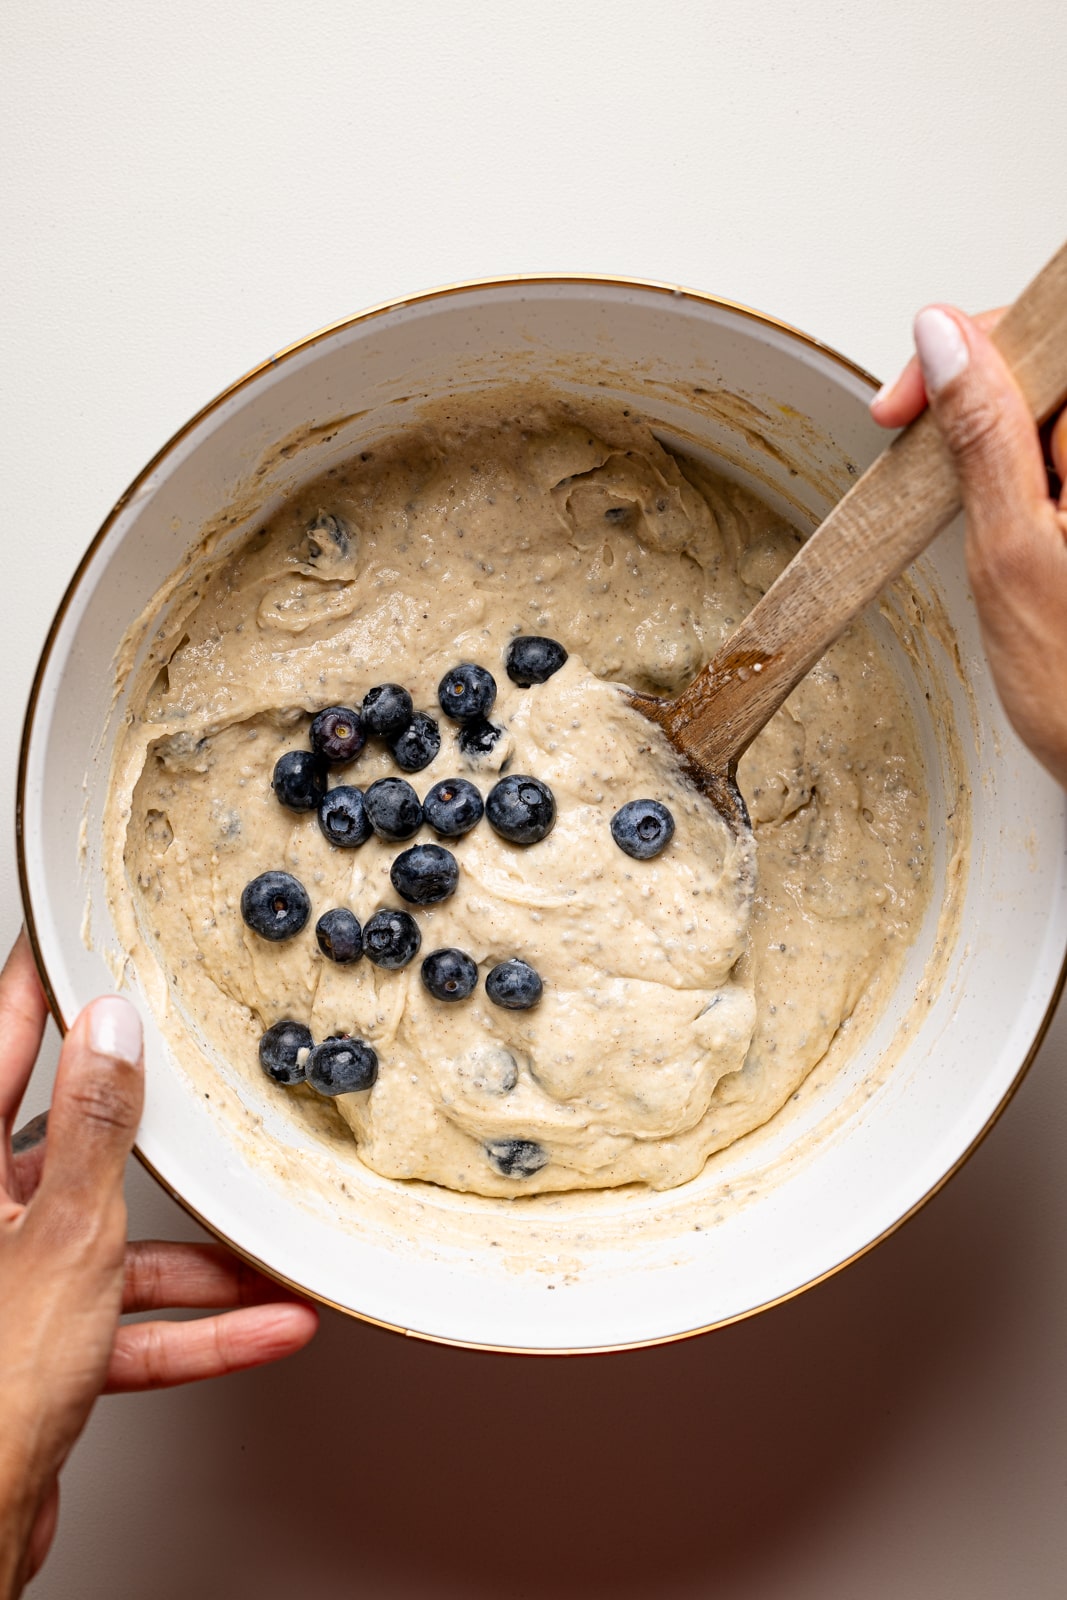 Pancake batter in a bowl with a wooden spoon and blueberries.